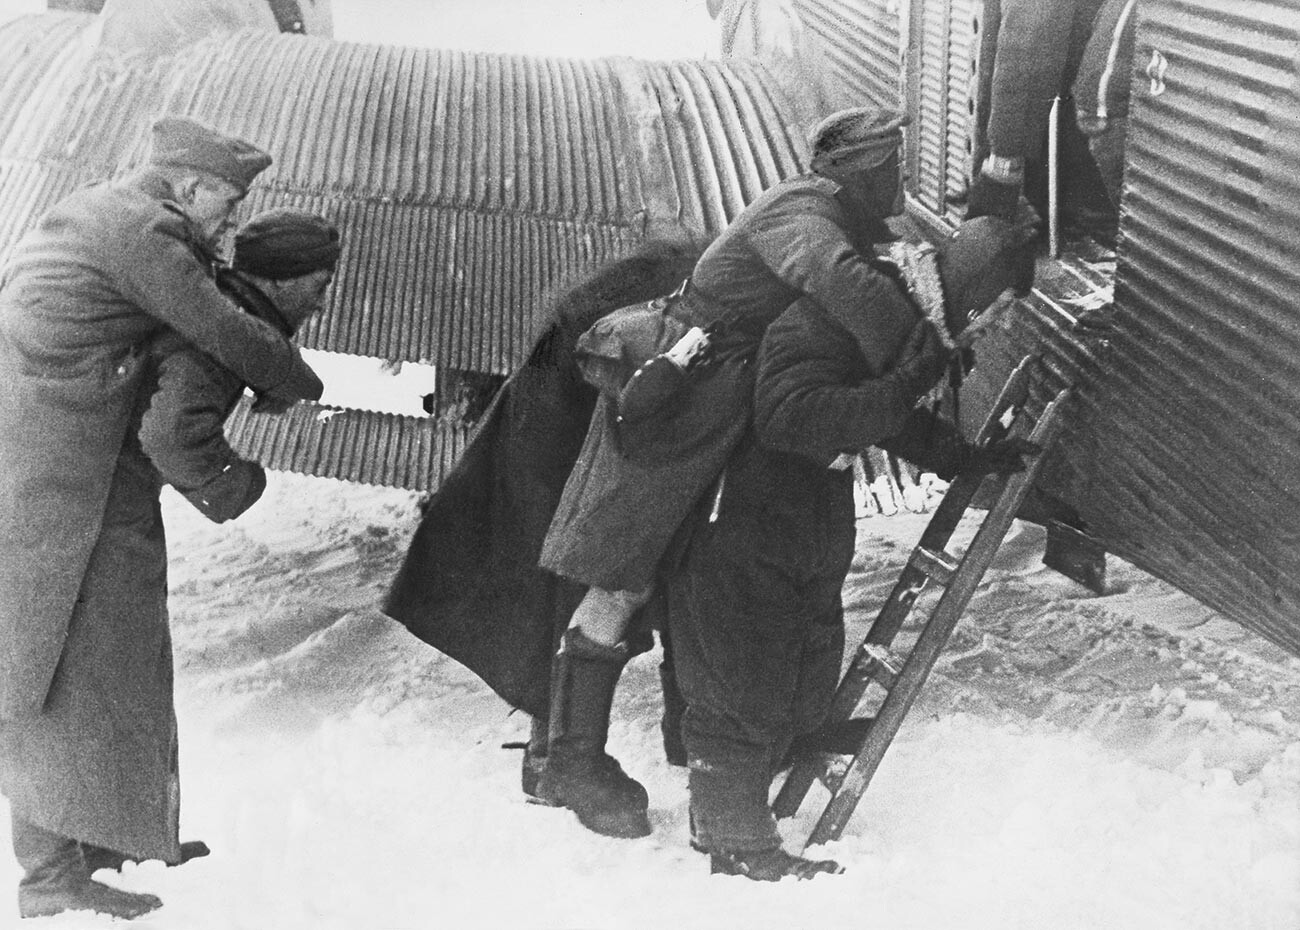 Wounded German soldiers loaded into a cargo plane Ju-52, Demyansk, 1942.